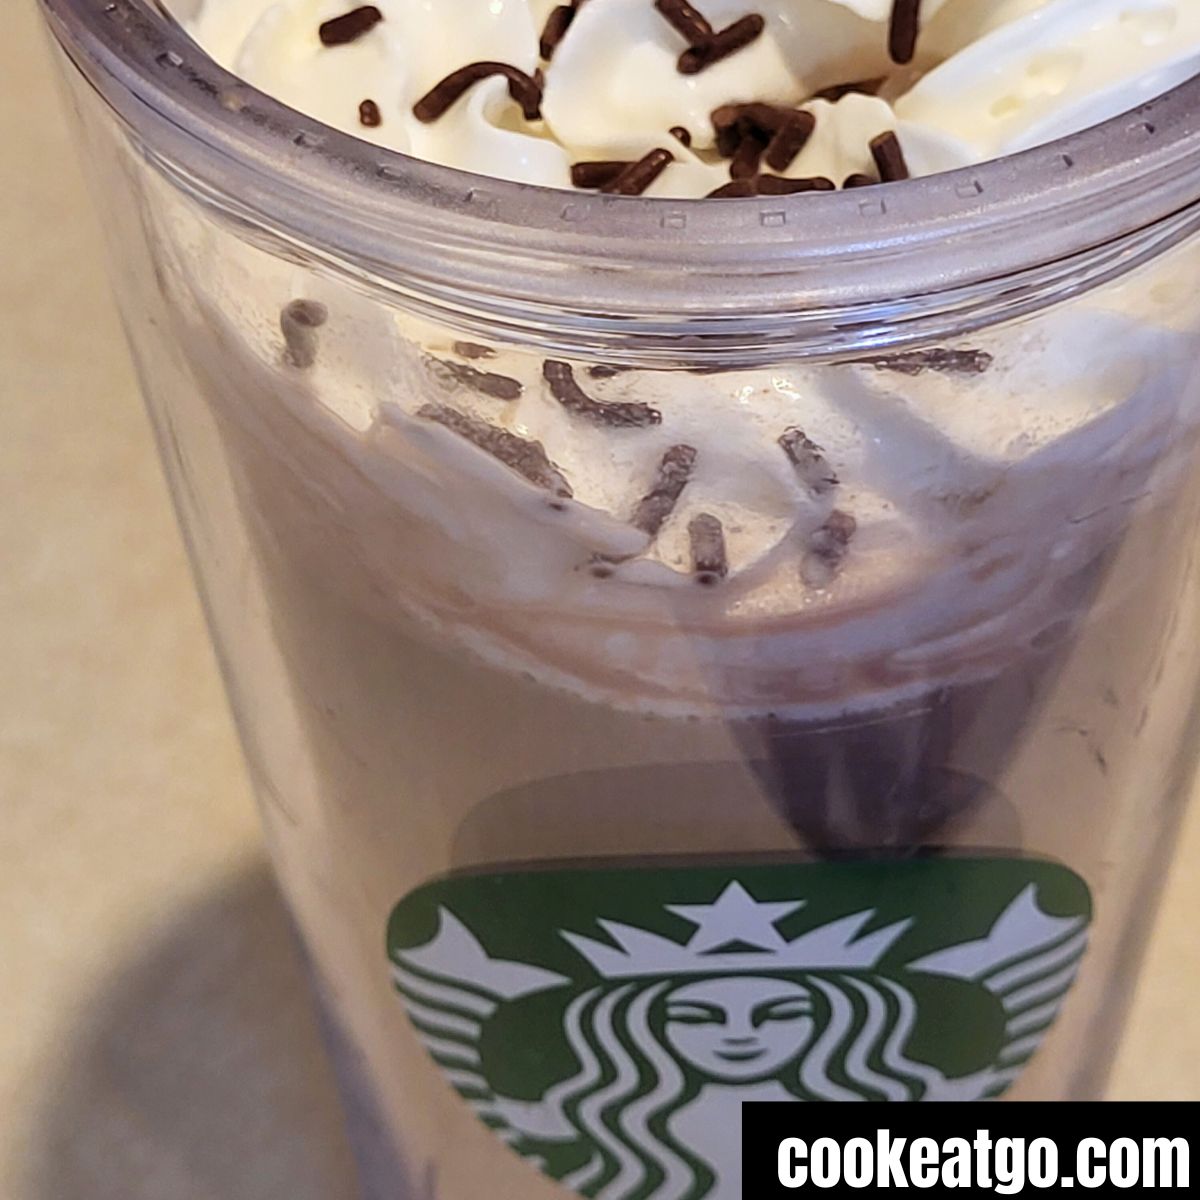 Starbucks venti clear cup with skinny mocha topped with whipped topping and chocolate sprinkle